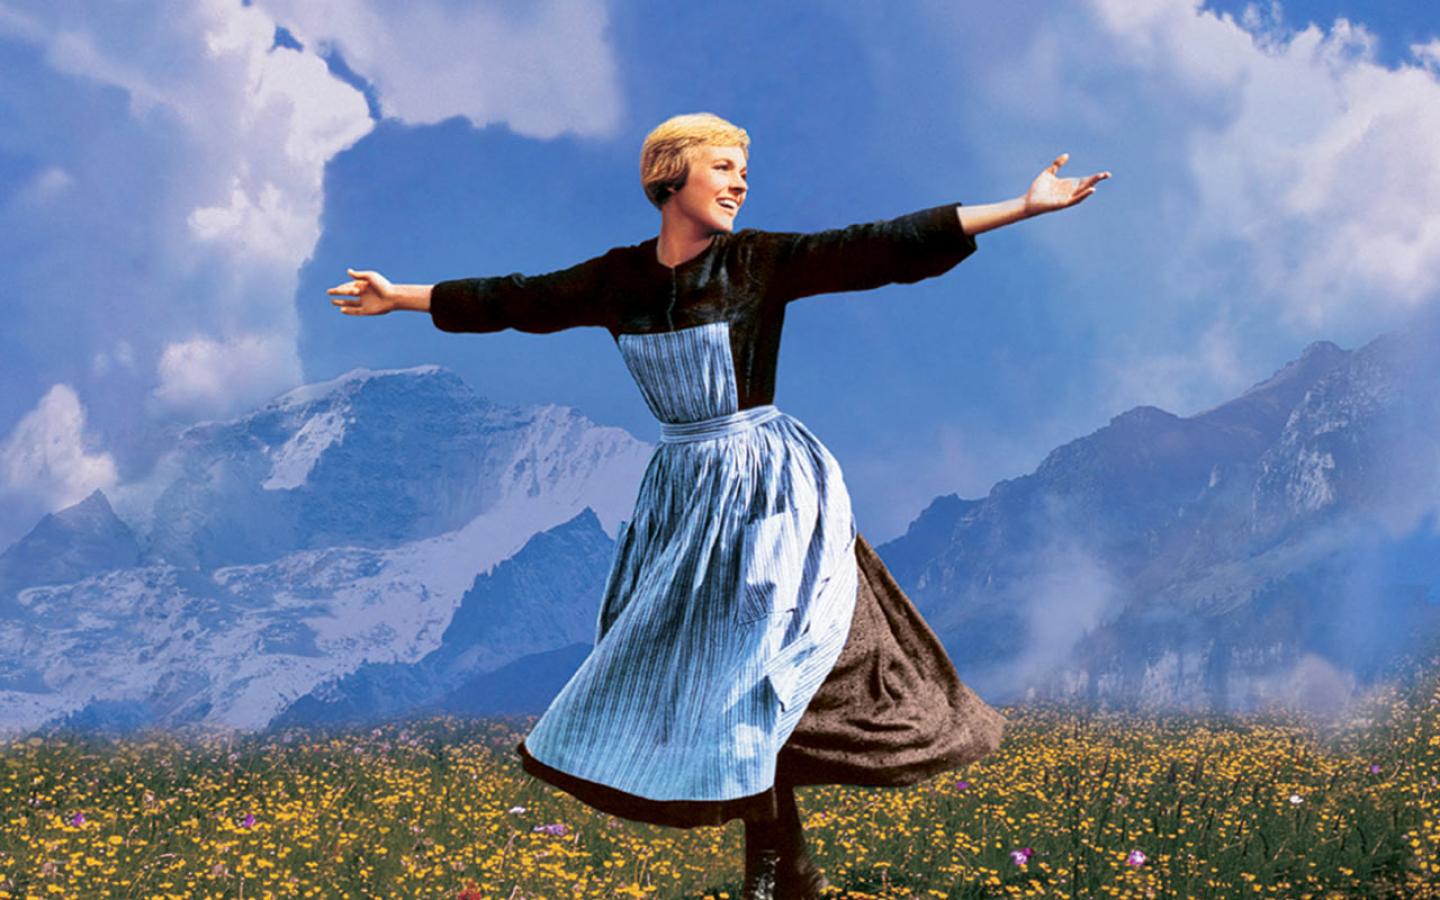 The Sound Of Music Wallpaper #2 1440 x 900 